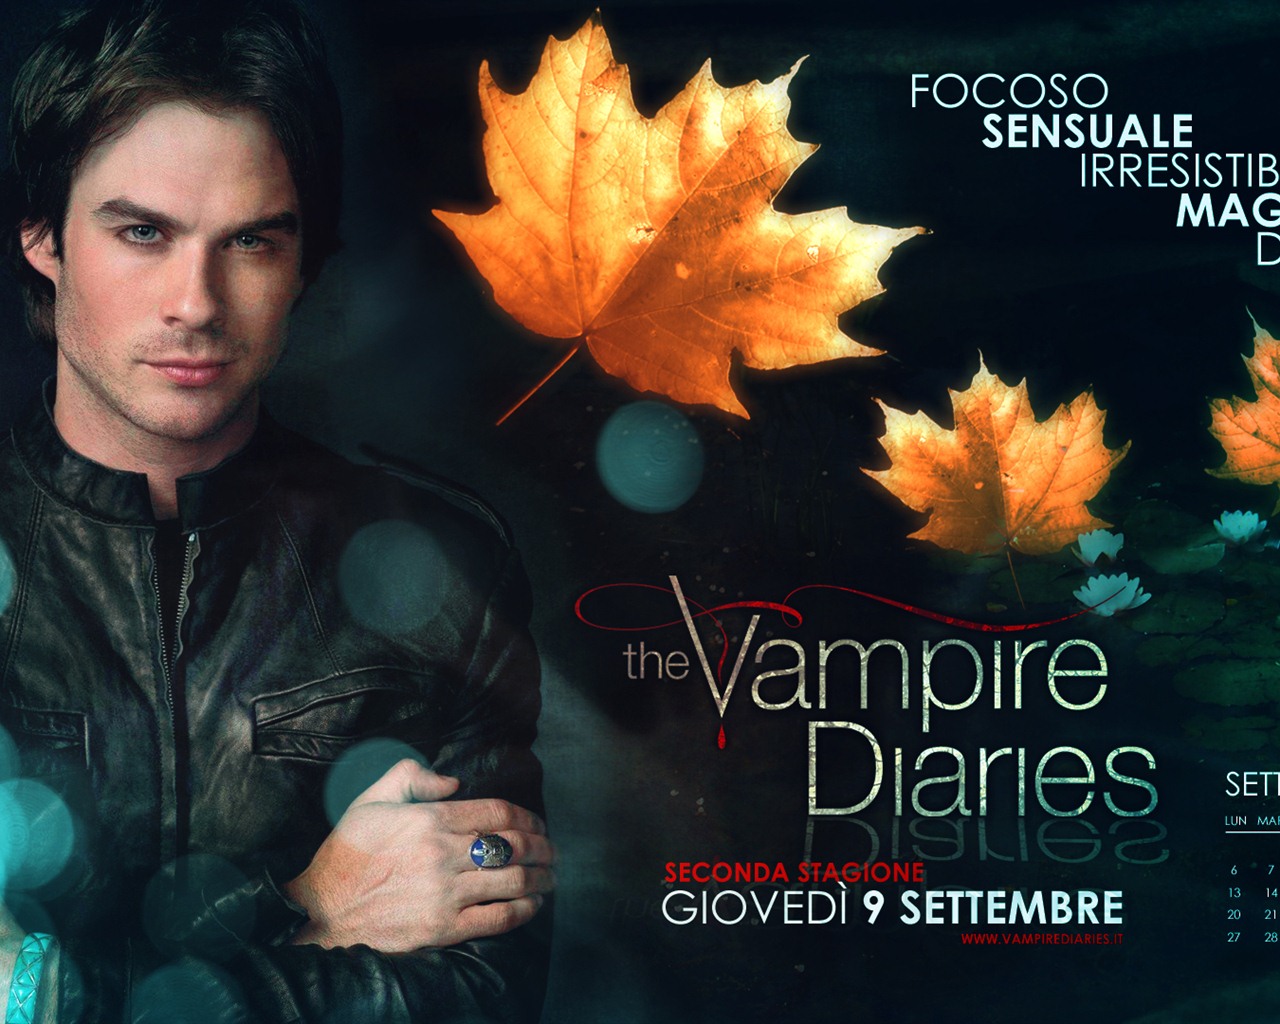 The Vampire Diaries HD Wallpapers #16 - 1280x1024